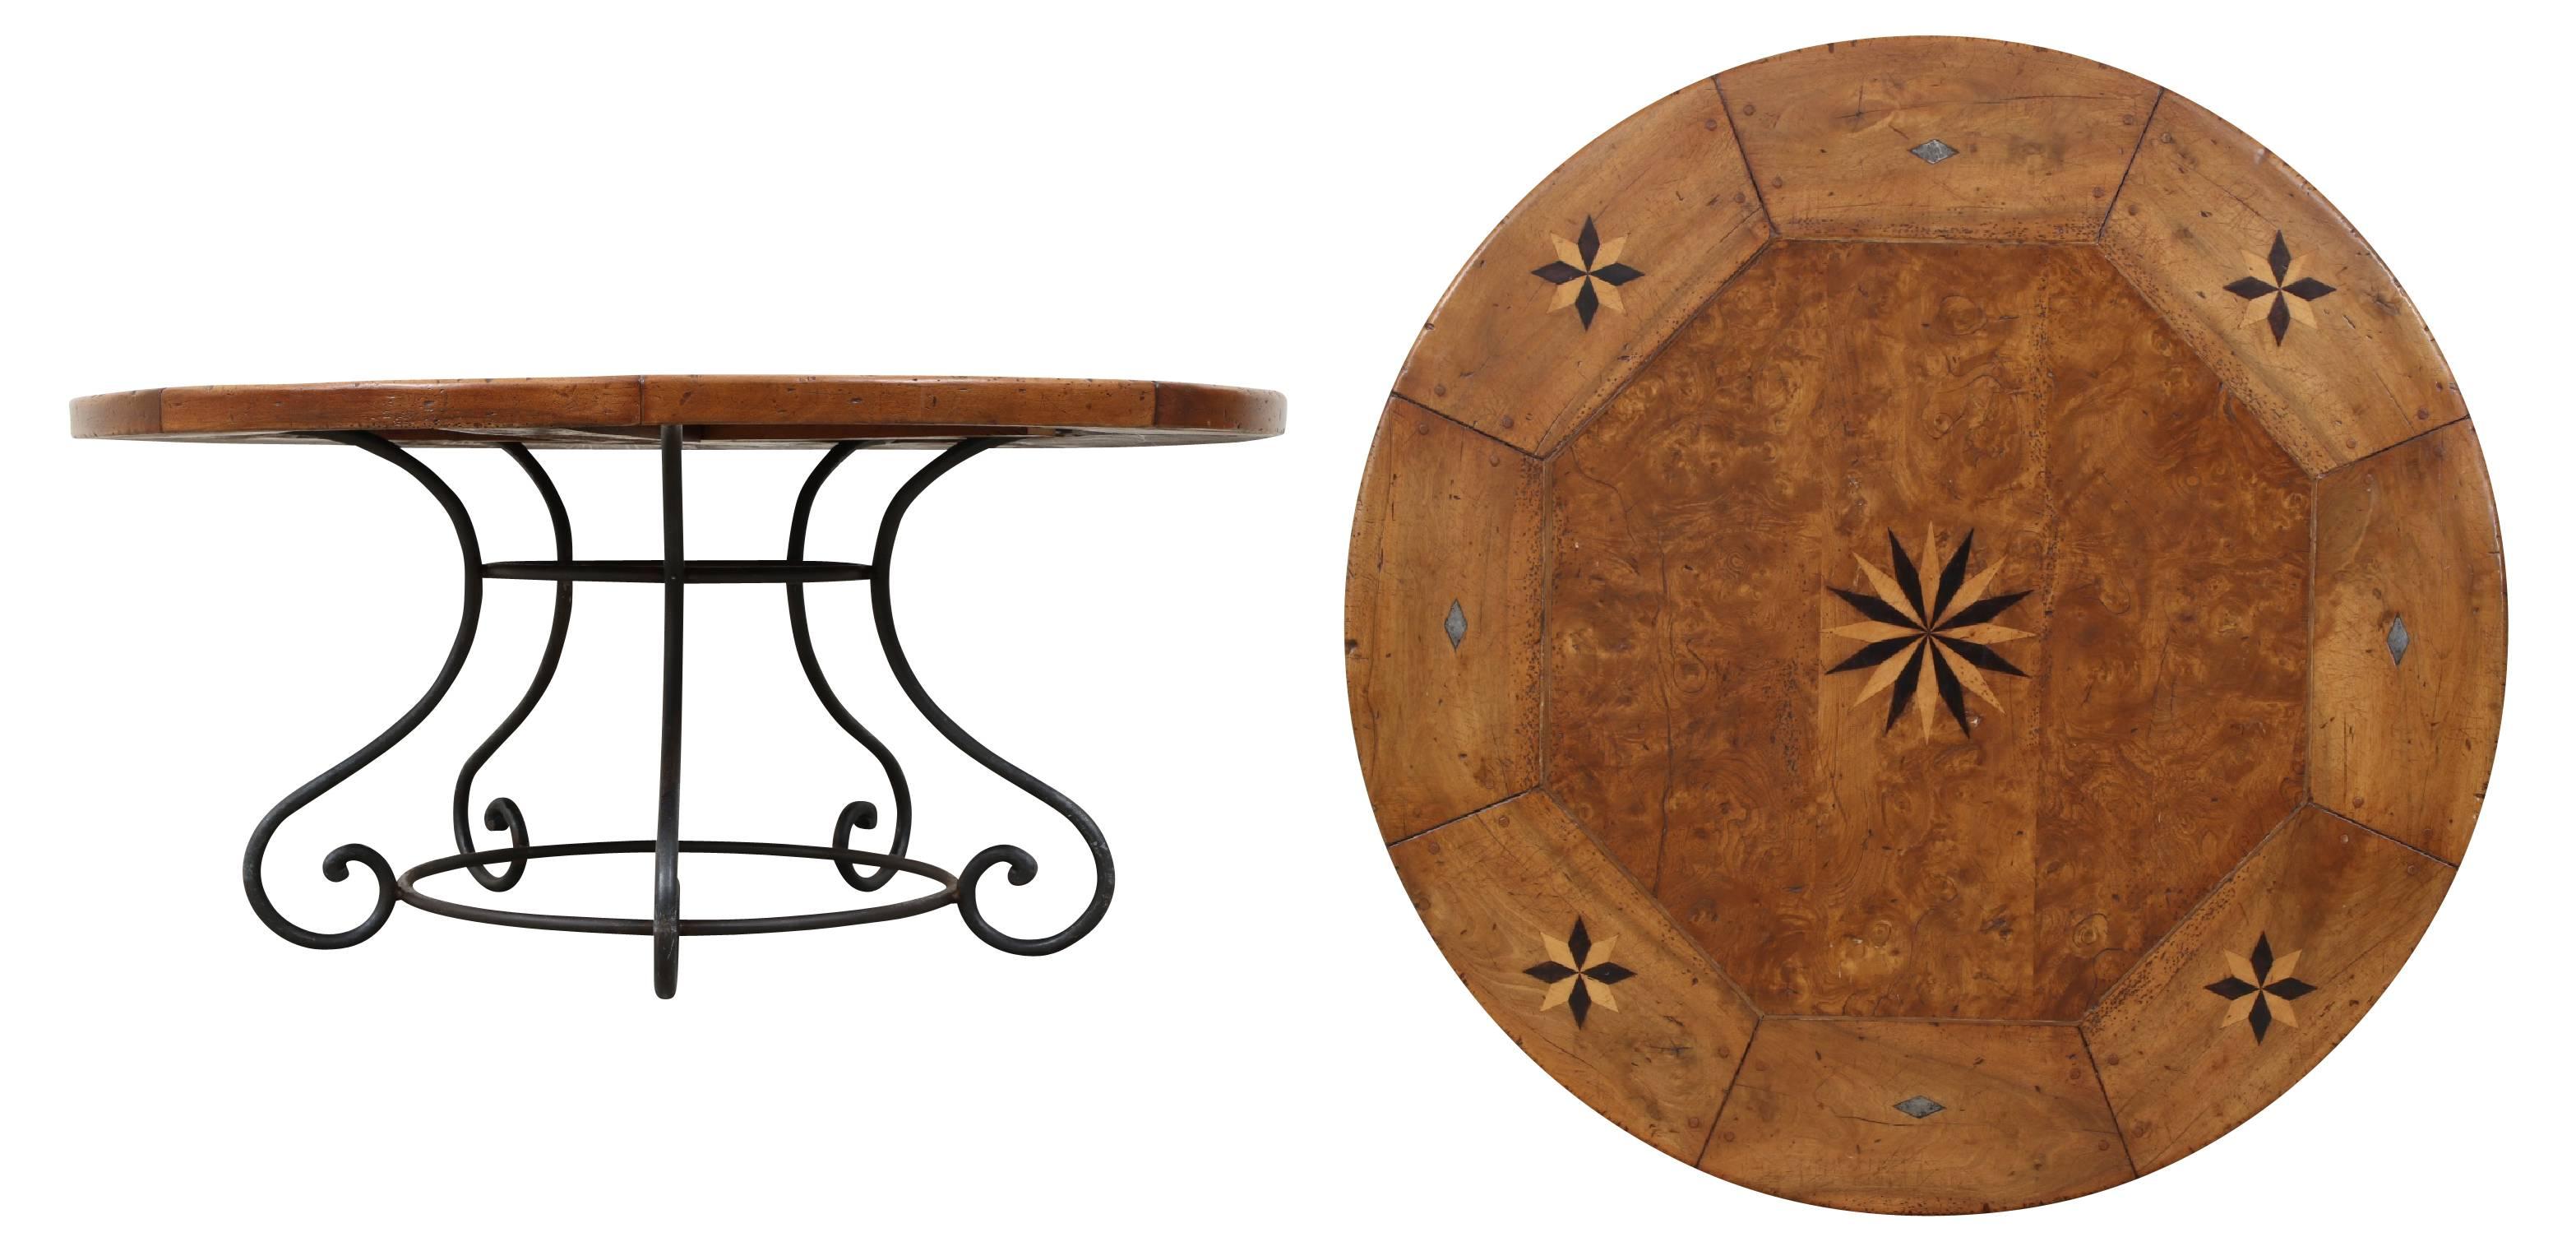 An inset burled wood octagonal top with an outer band in eight curved wood segments. The centre and four alternating band segments with inlaid star motifs in dark and light woods and metal diamond motifs in the other band segments. A newer wrought